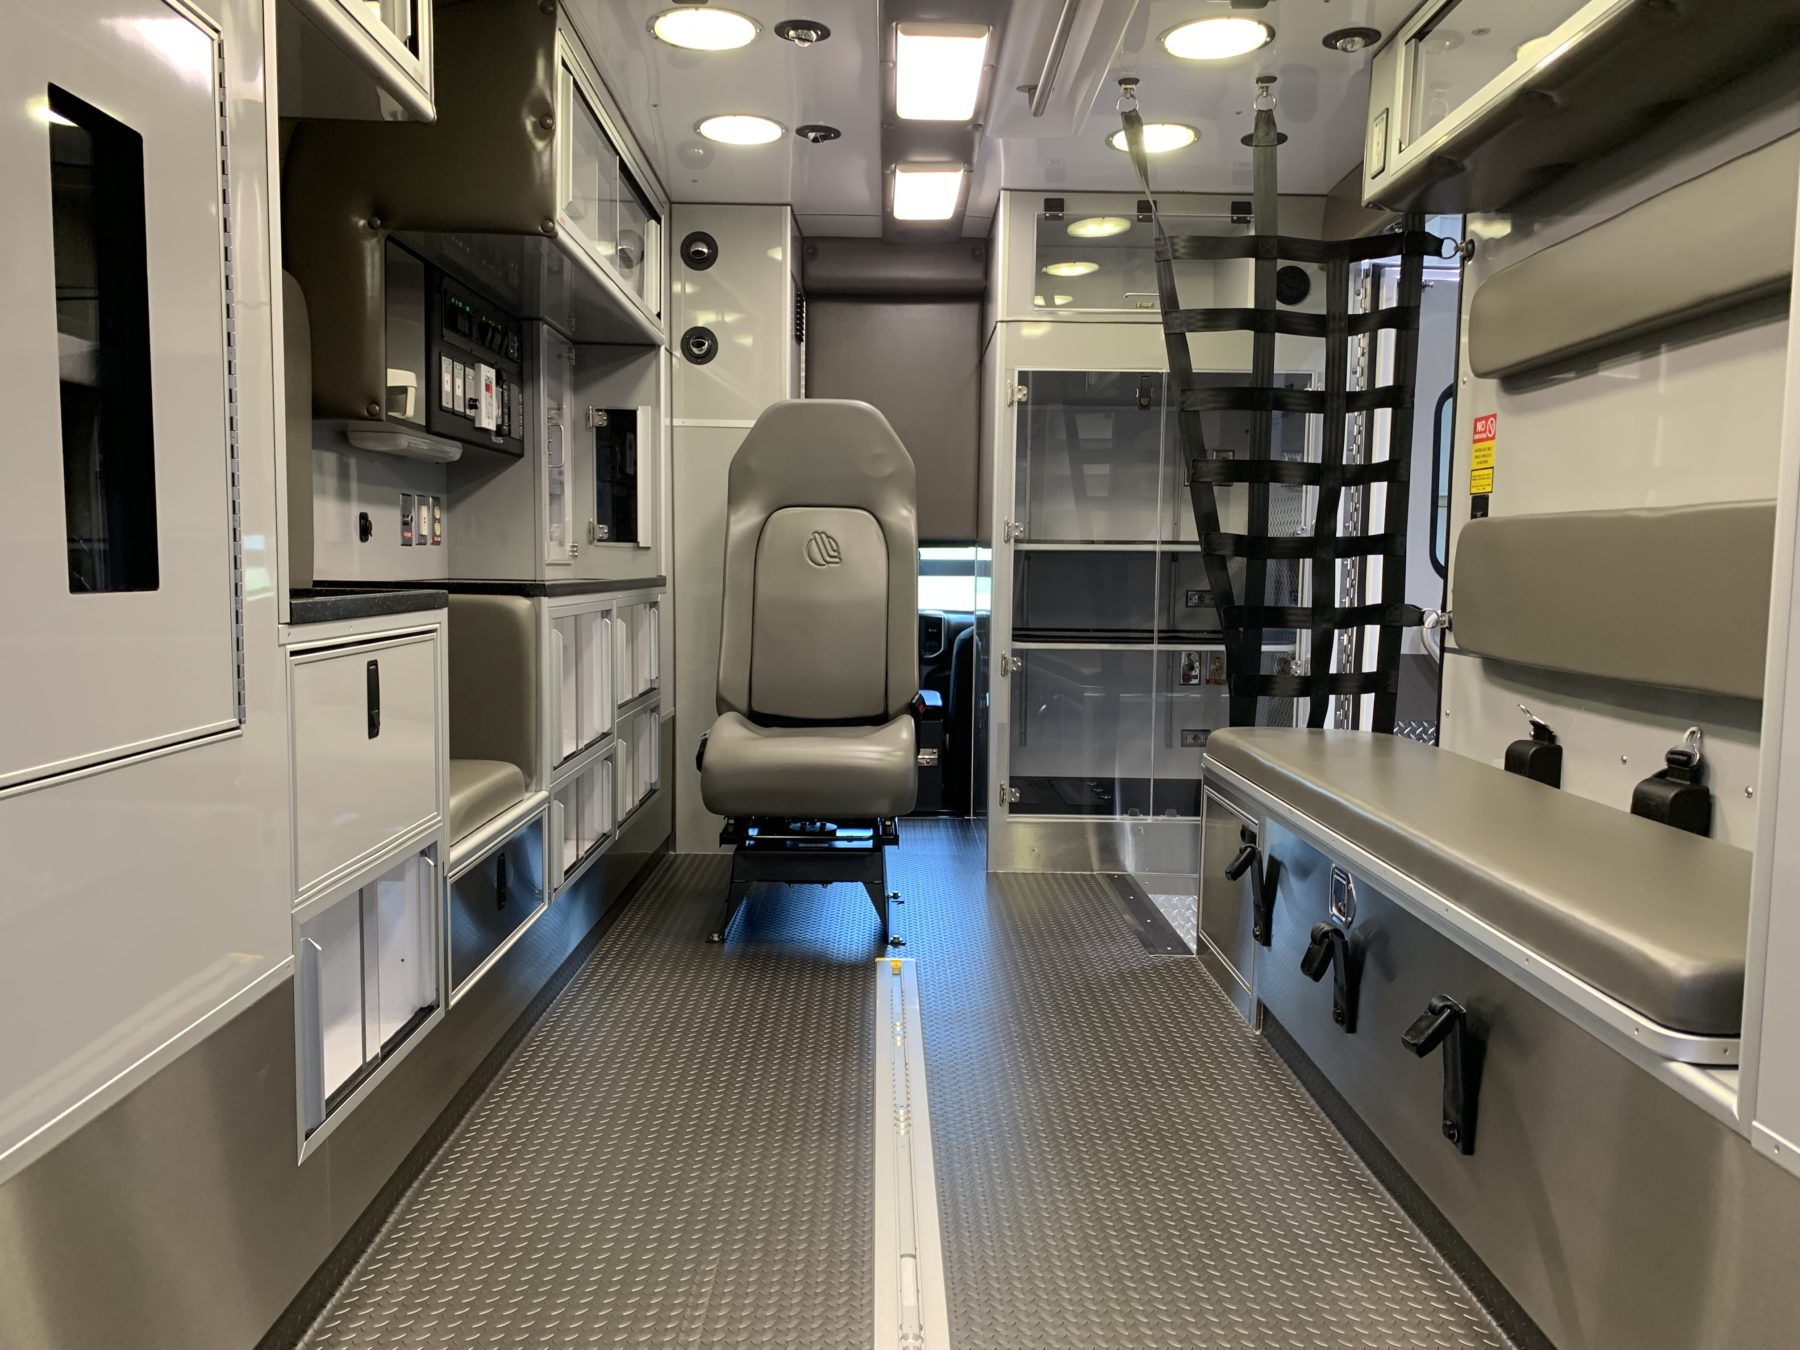 2022 Ram 4500 4x4 Heavy Duty Ambulance For Sale – Picture 2